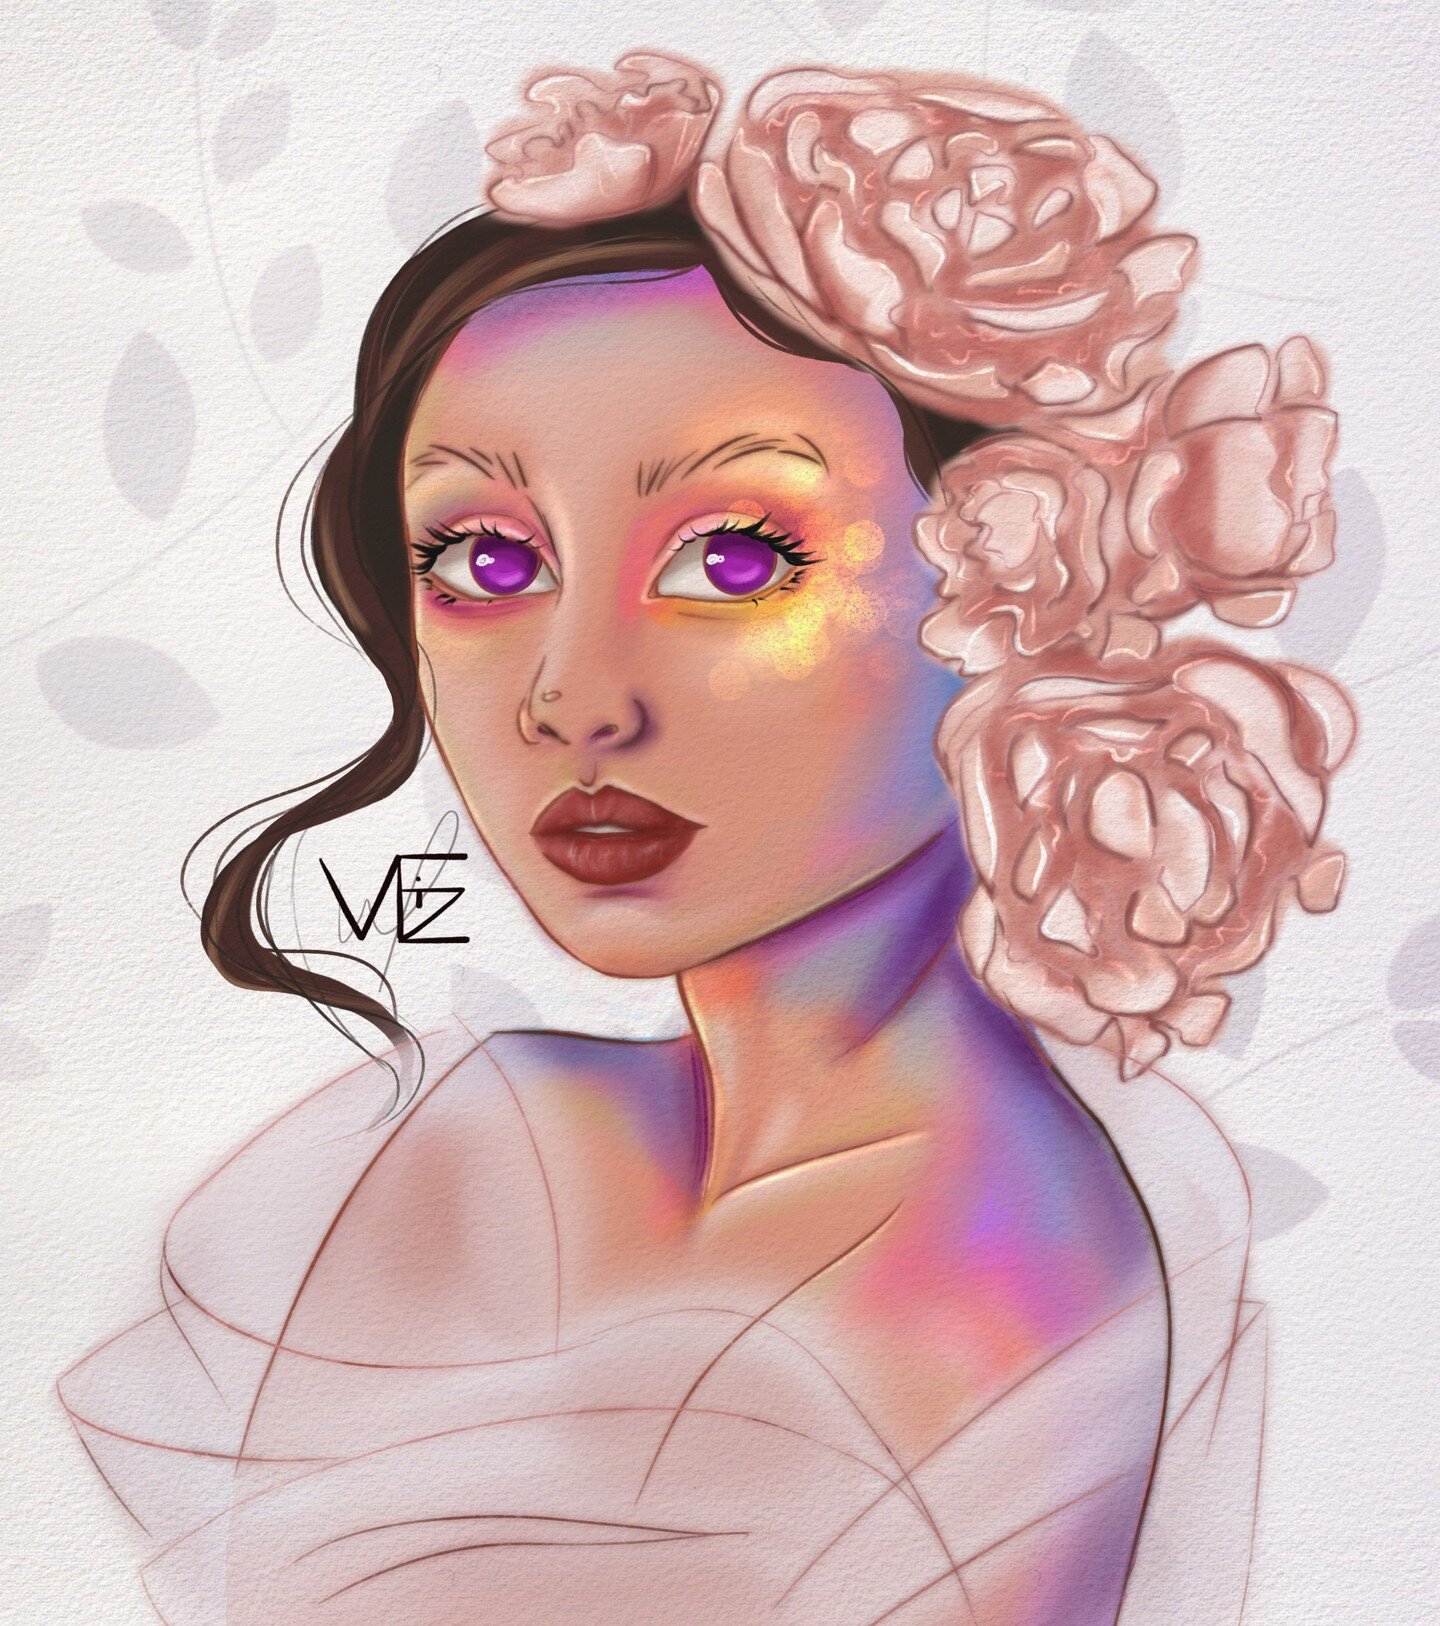 &ldquo;Peony&rdquo; is done. I&rsquo;m not very good at flowers but it&rsquo;s the impression that counts right ? 🤣. It is also this weeks challenge for #thetuesdaycollective Hair plants prompt! what Do you think of this one ?